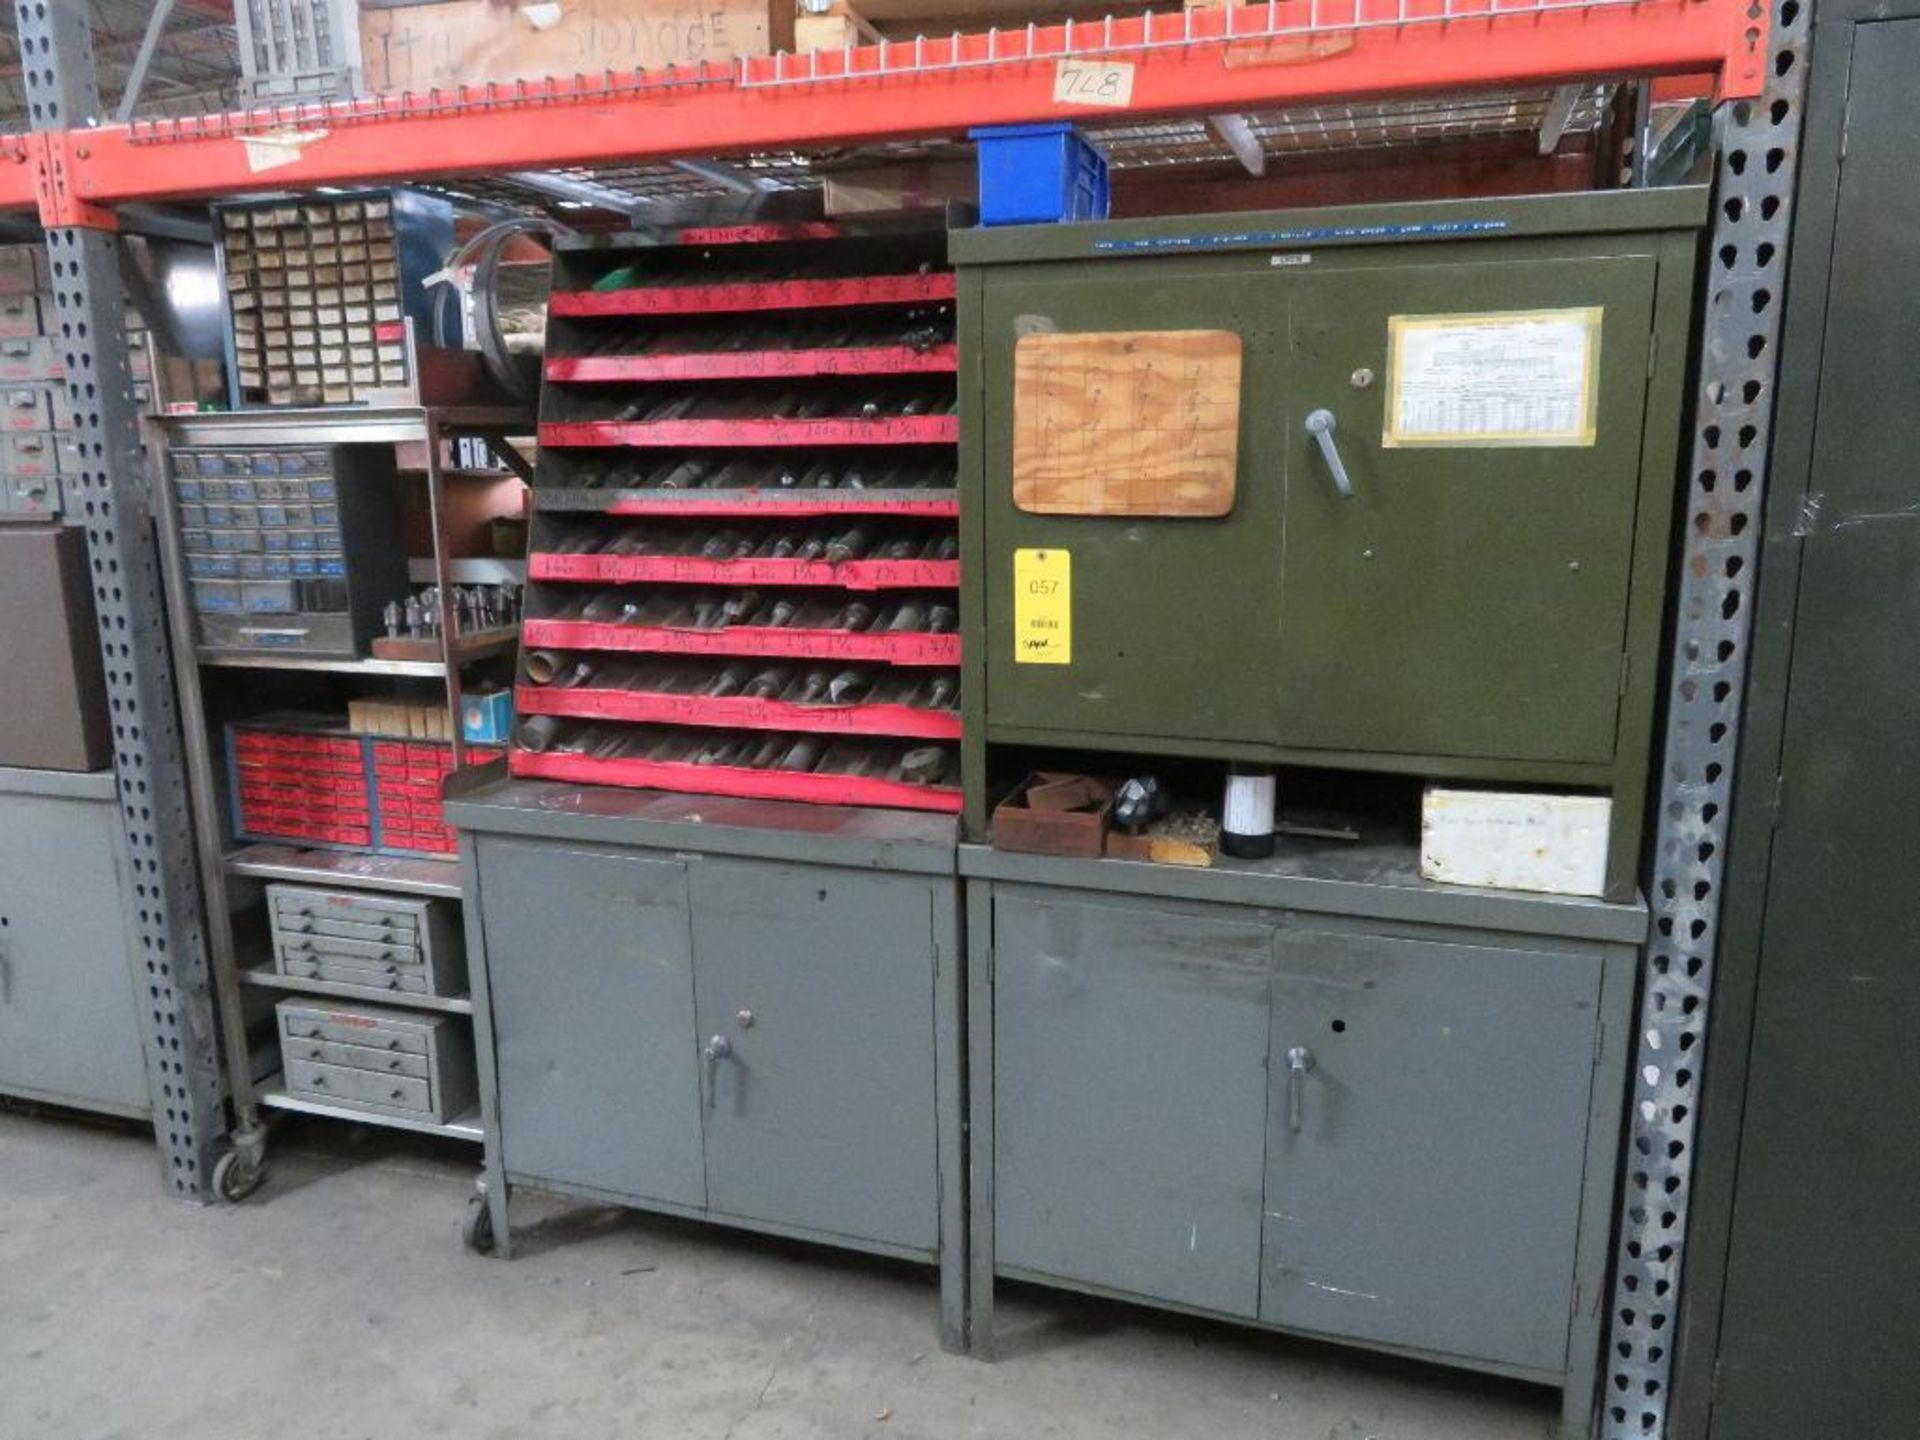 LOT: Steel Cabinets with Contents of Assorted Drill Bits, Punches, Countersinks, Taps, Hardware